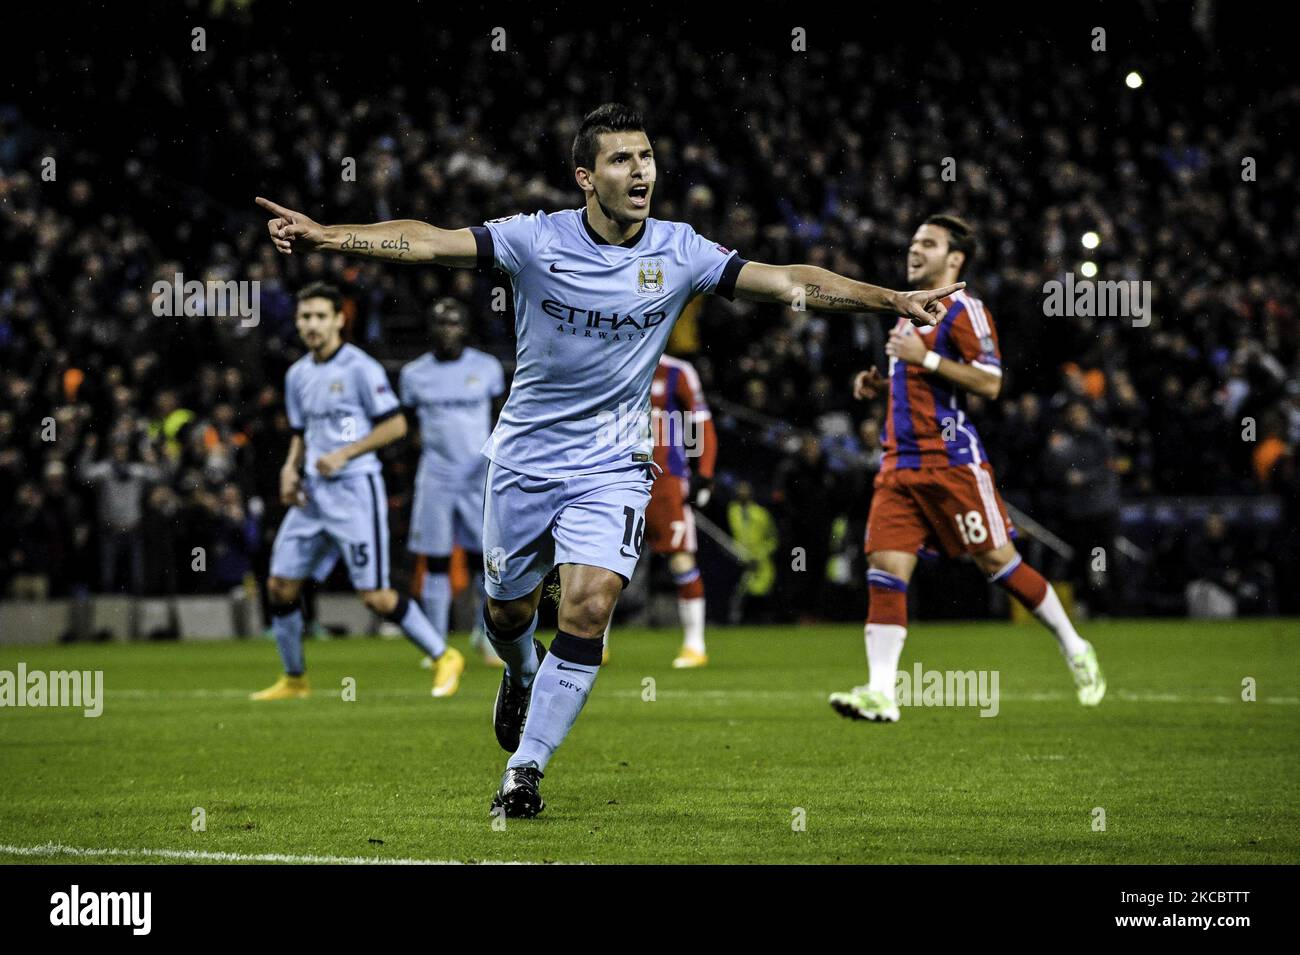 Man City forward Sergio Aguero celebrates opening during the UEFA Champions League, Group E match between Manchester City & Bayern Munich at the Etihad Stadium in Manchester on Wednesday November 25th 2014. (Photo by MI News/NurPhoto) Stock Photo